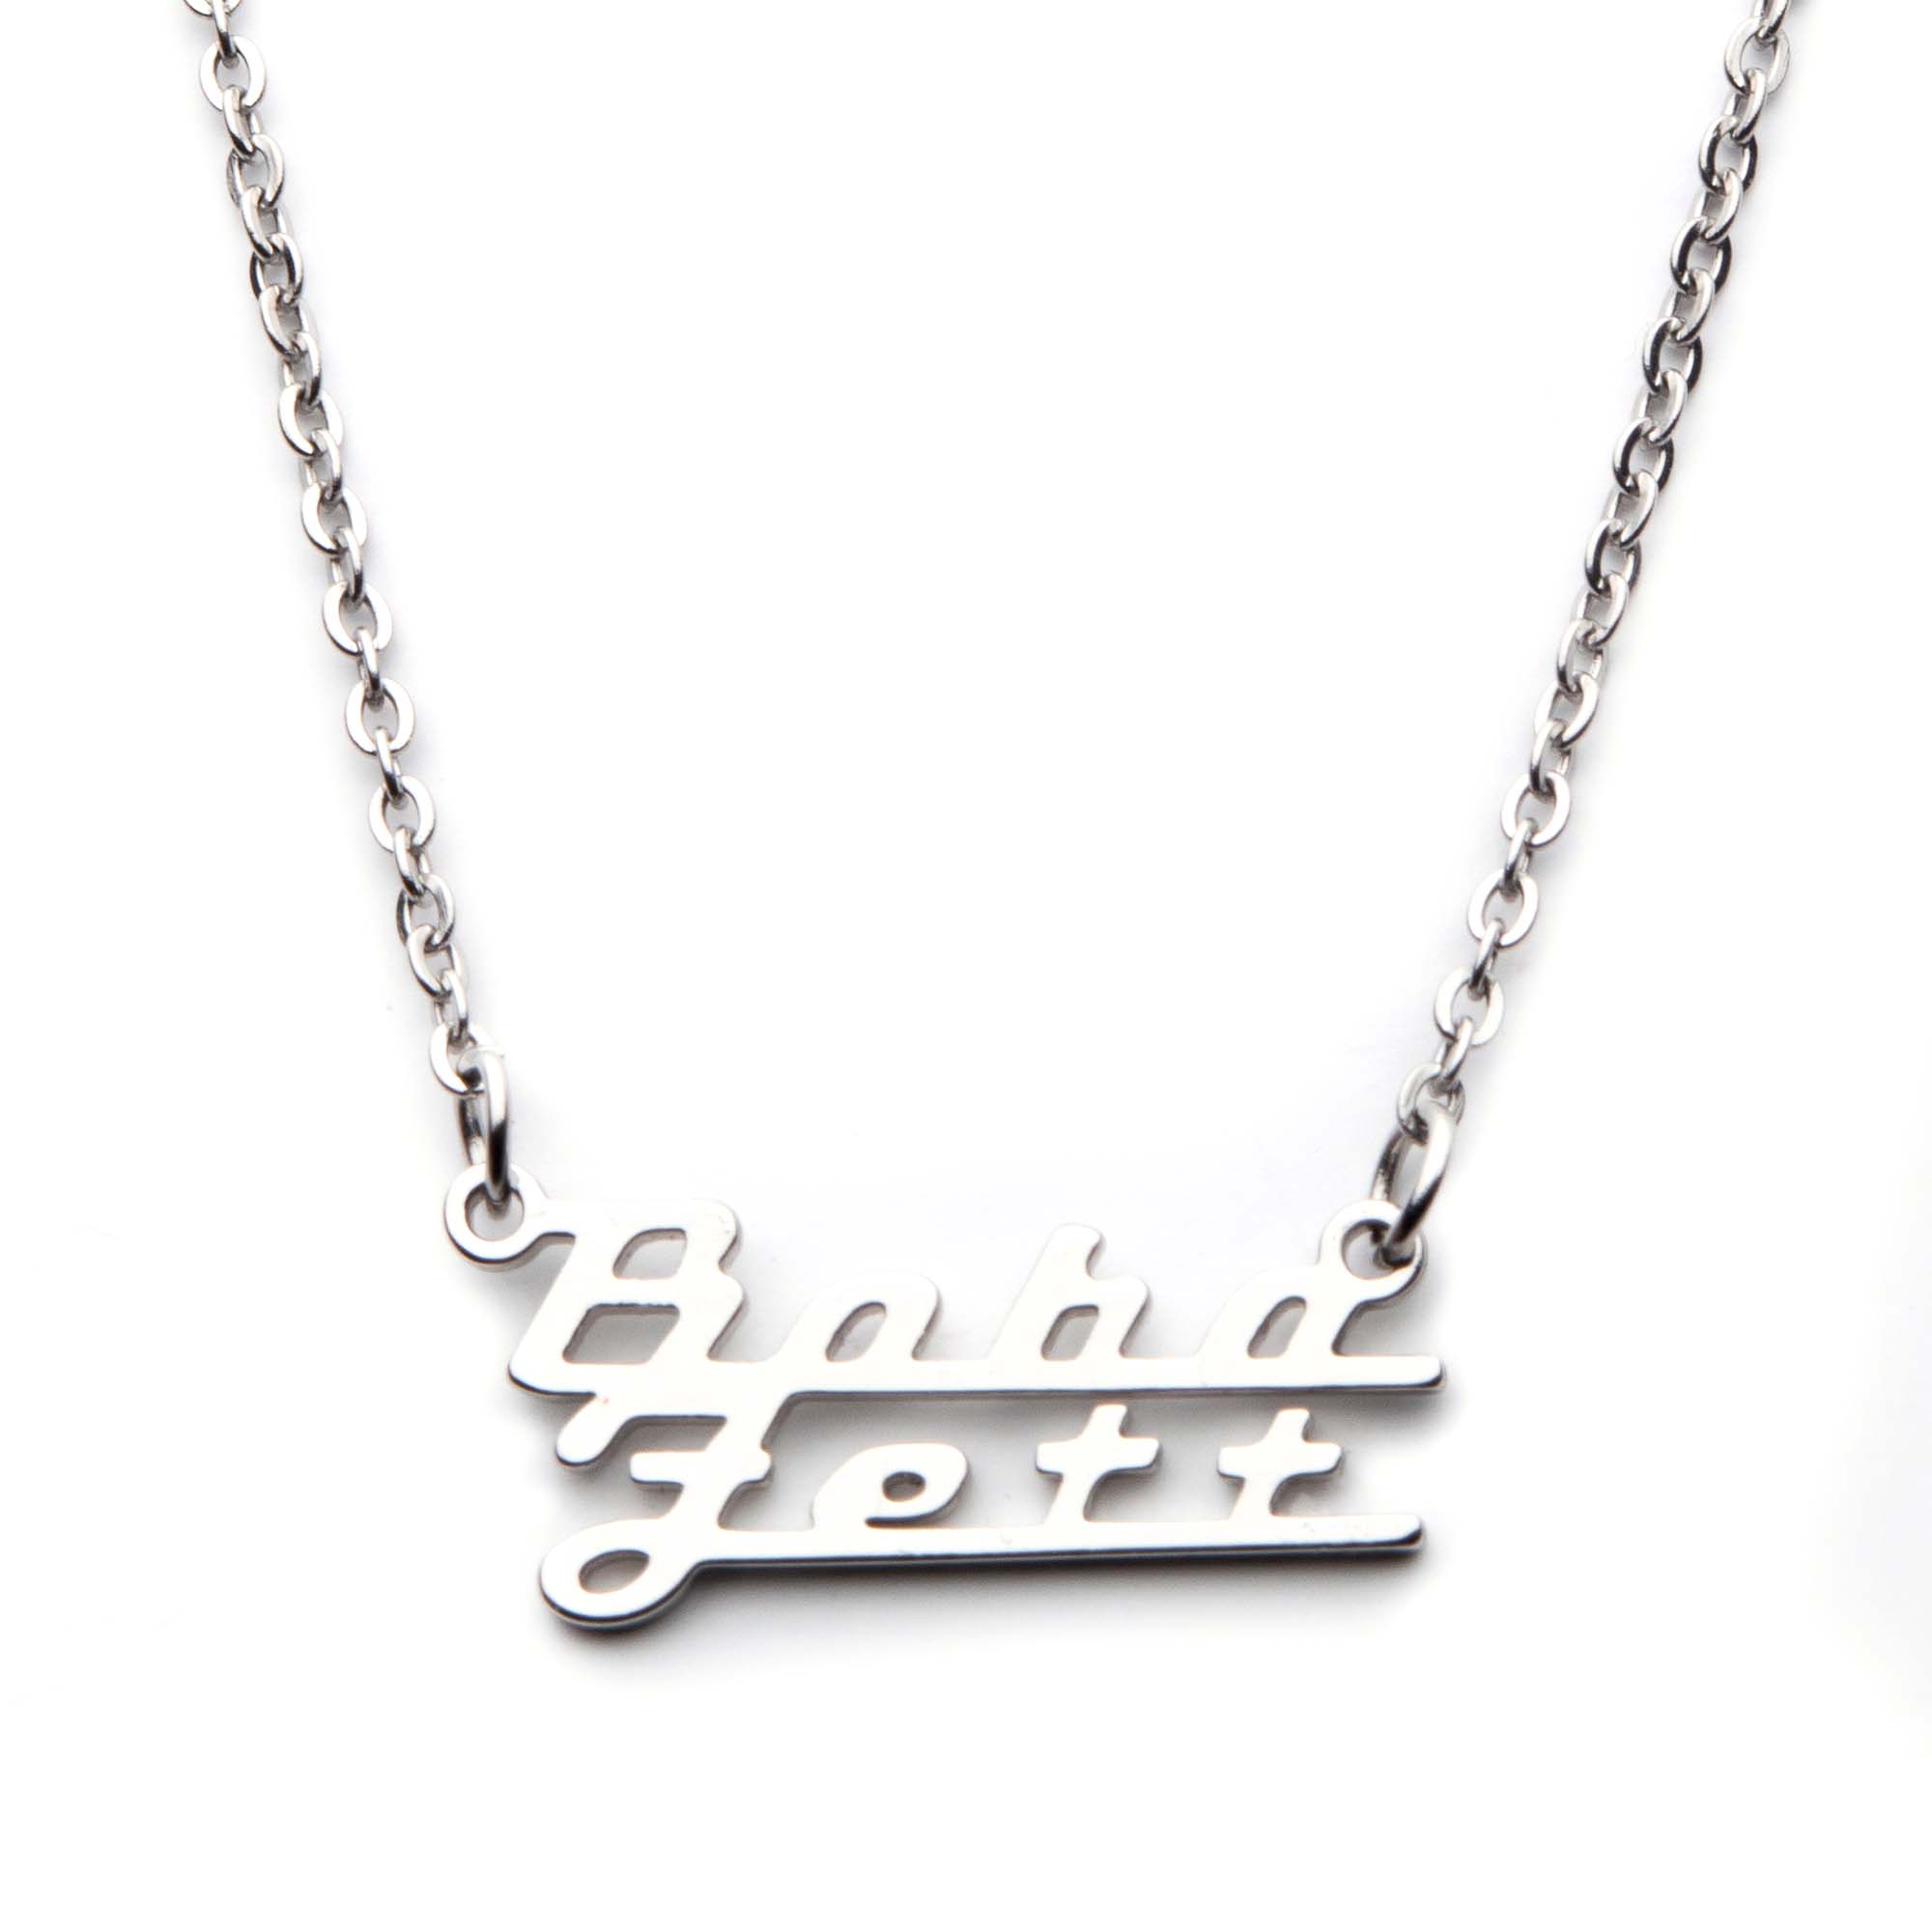 Star Wars Boba Fett Name Cut Out Necklace